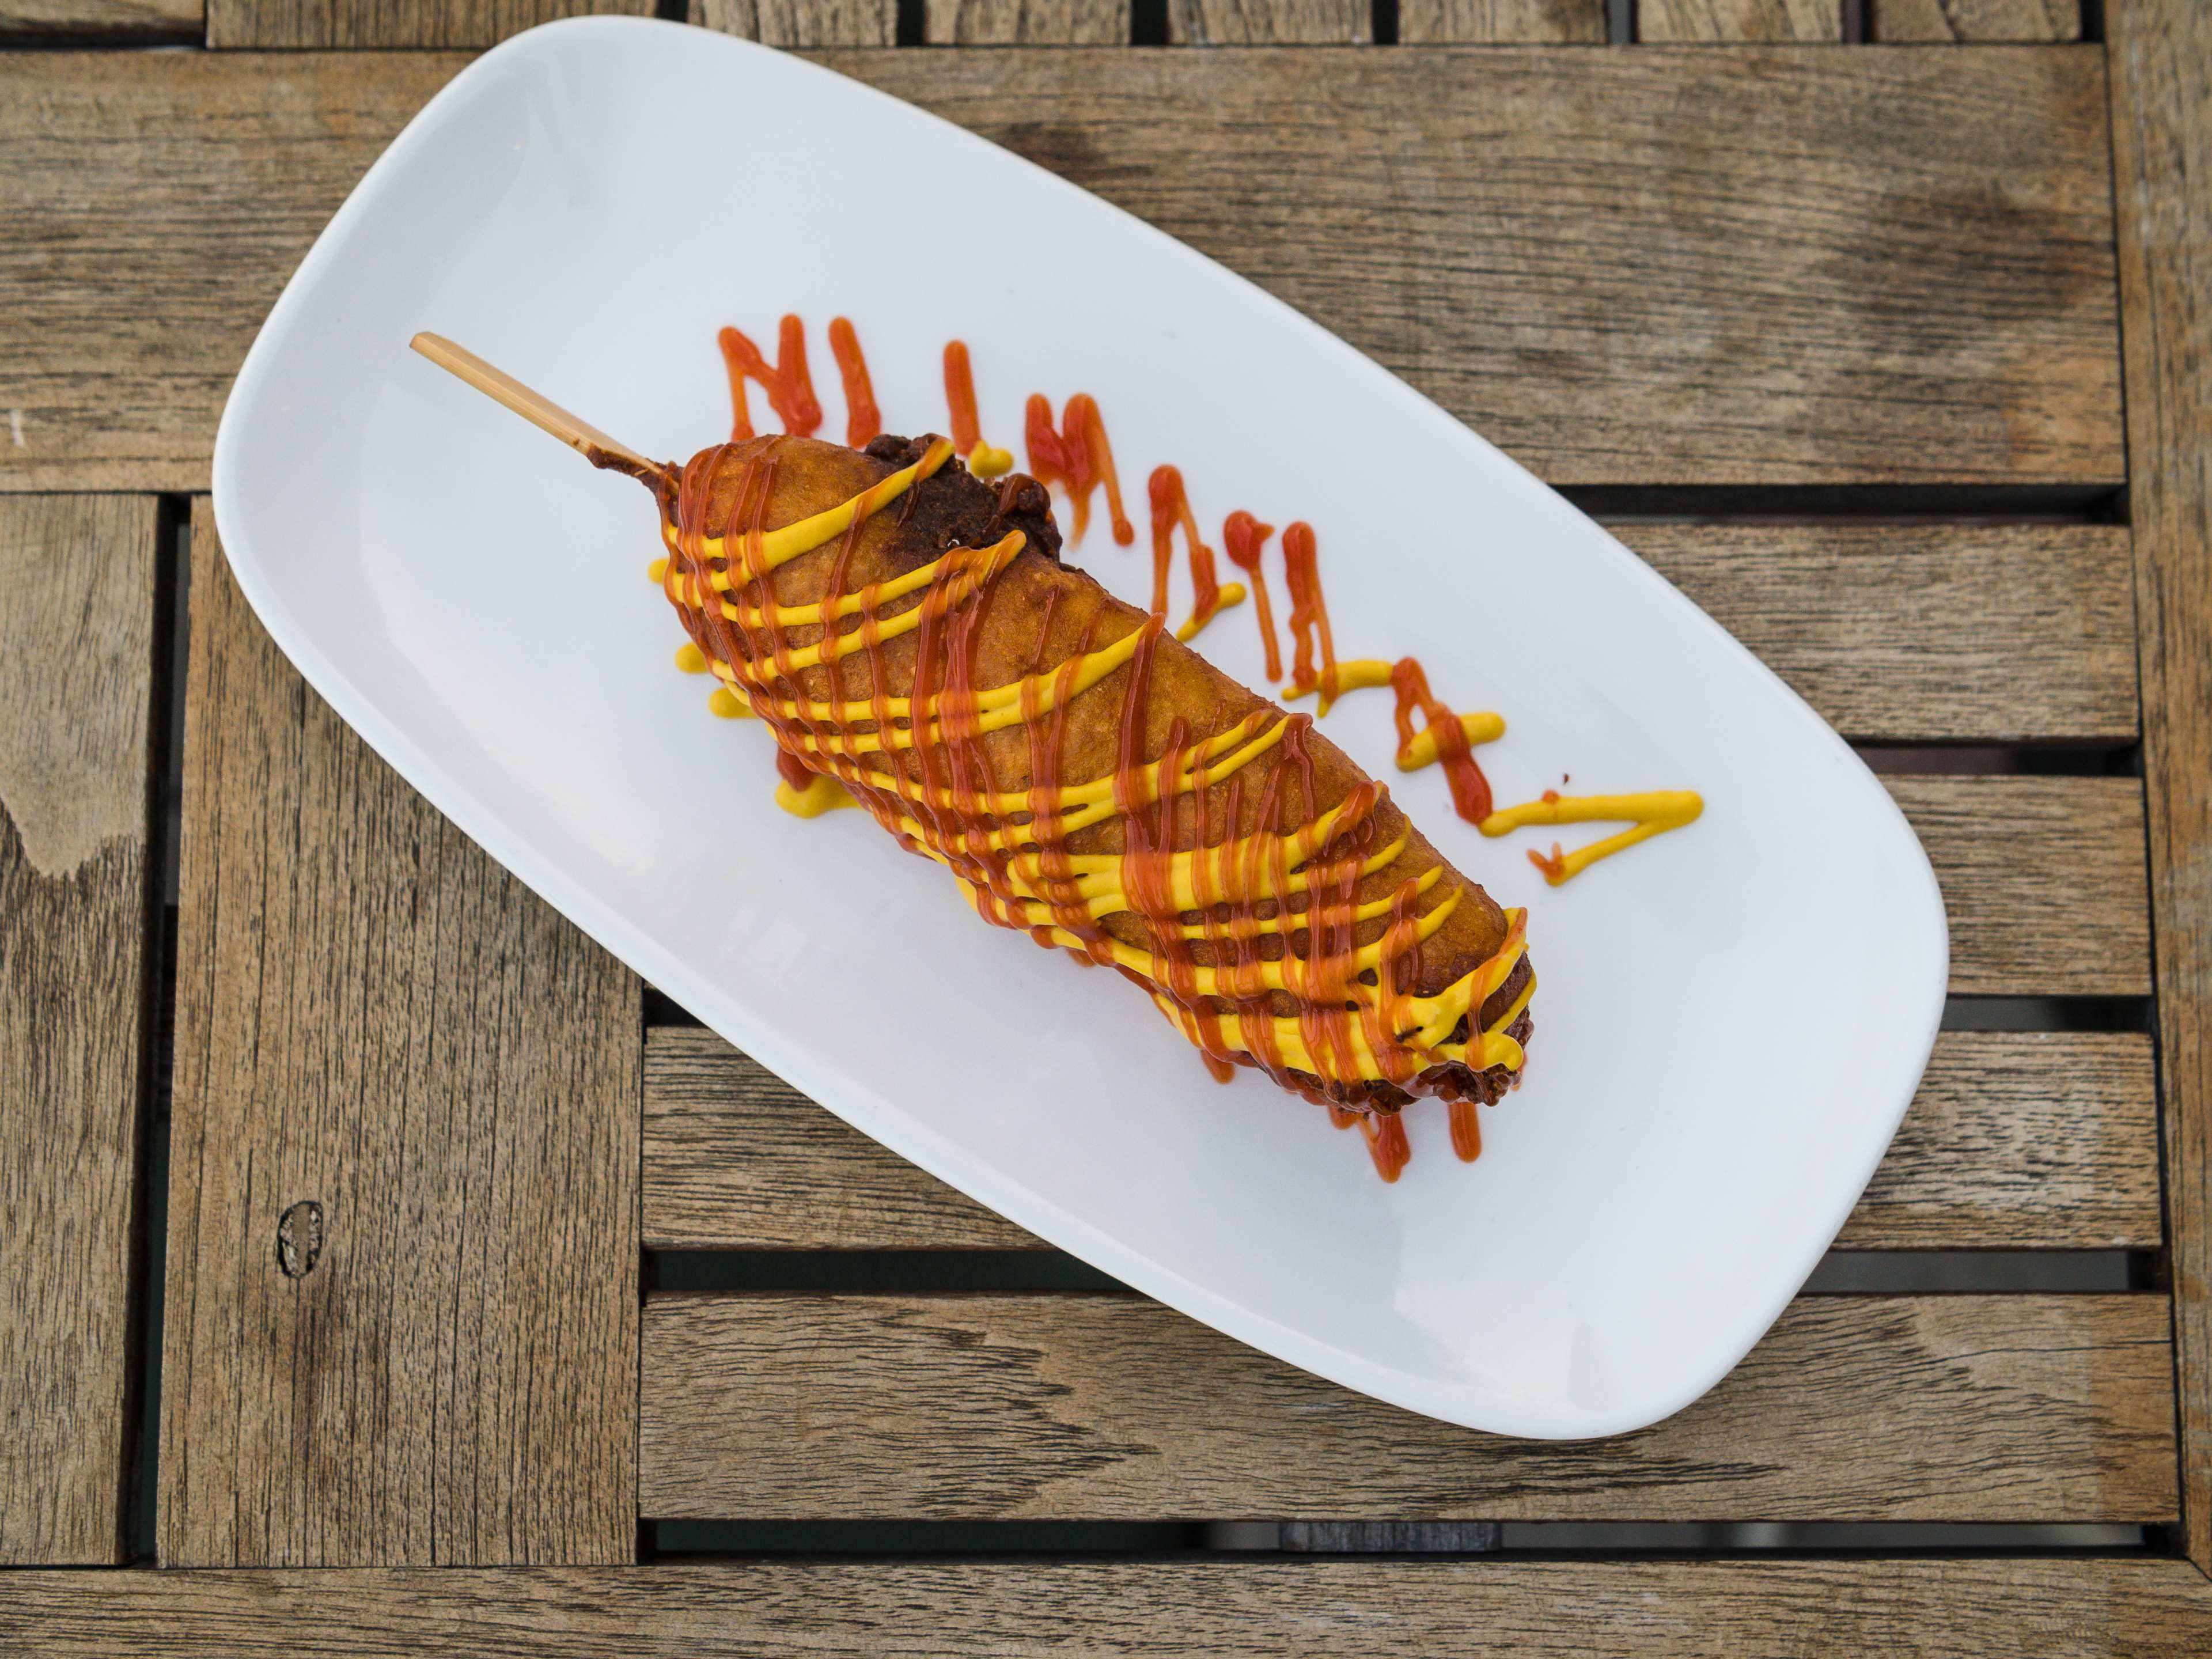 A corn dog with mustard and ketchup drizzled on top.